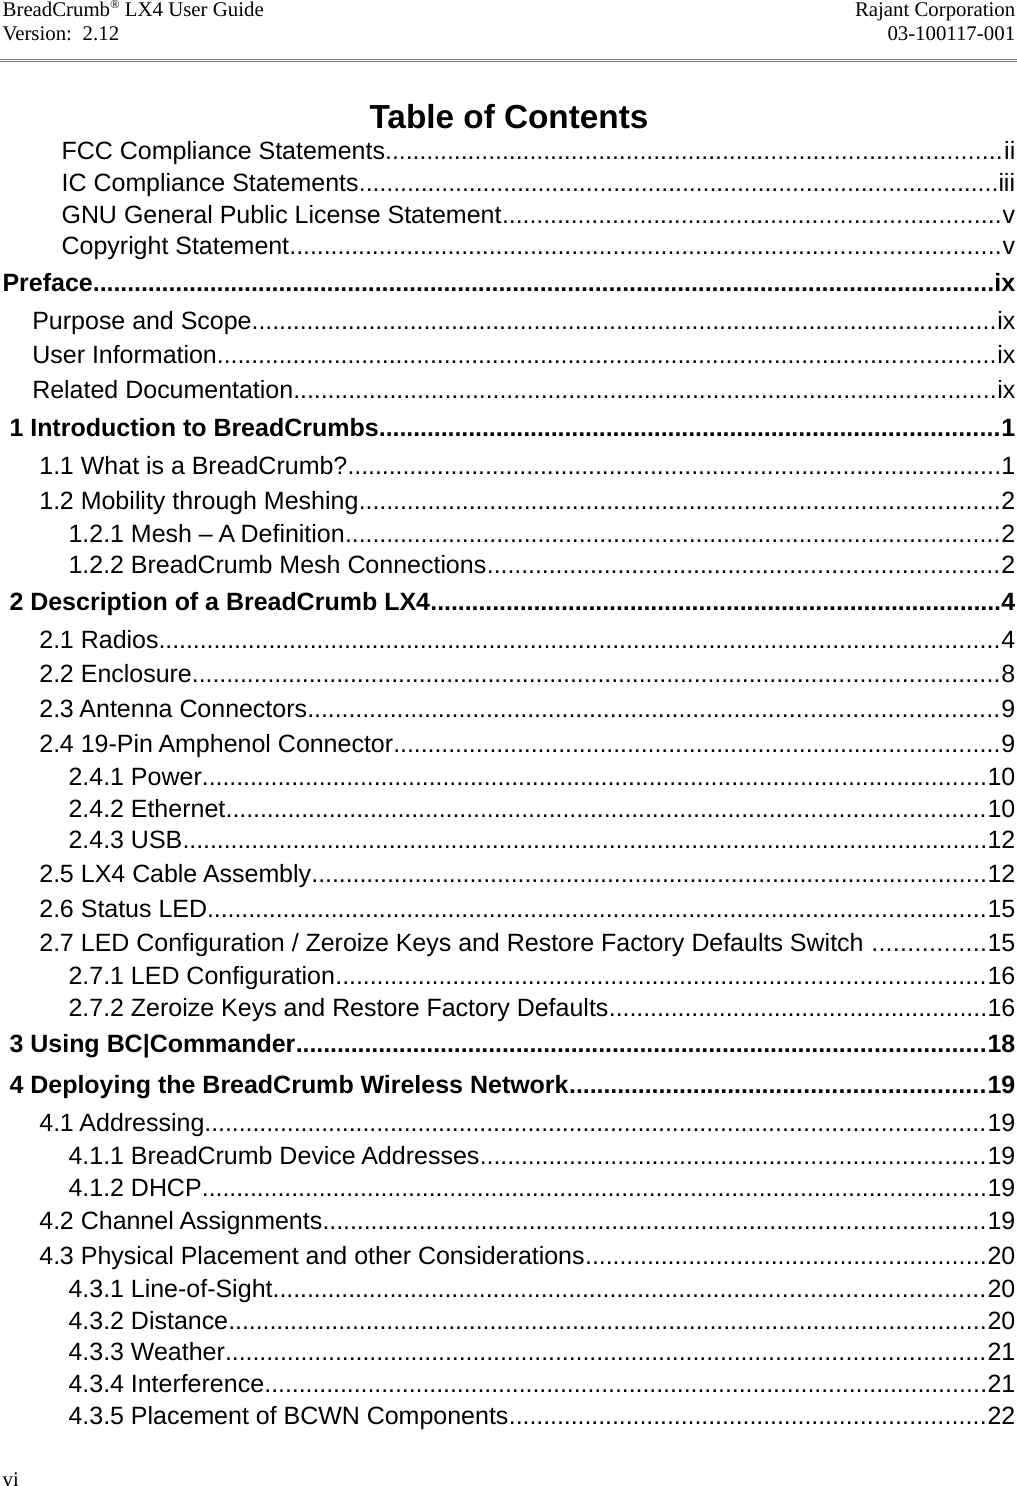 BreadCrumb® LX4 User Guide Rajant CorporationVersion:  2.12 03-100117-001Table of ContentsFCC Compliance Statements.........................................................................................iiIC Compliance Statements.............................................................................................iiiGNU General Public License Statement........................................................................vCopyright Statement.......................................................................................................vPreface...................................................................................................................................ixPurpose and Scope............................................................................................................ixUser Information.................................................................................................................ixRelated Documentation......................................................................................................ix 1 Introduction to BreadCrumbs..........................................................................................1 1.1 What is a BreadCrumb?...............................................................................................1 1.2 Mobility through Meshing.............................................................................................2 1.2.1 Mesh – A Definition...............................................................................................2 1.2.2 BreadCrumb Mesh Connections..........................................................................2 2 Description of a BreadCrumb LX4...................................................................................4 2.1 Radios..........................................................................................................................4 2.2 Enclosure.....................................................................................................................8 2.3 Antenna Connectors....................................................................................................9 2.4 19-Pin Amphenol Connector........................................................................................9 2.4.1 Power..................................................................................................................10 2.4.2 Ethernet..............................................................................................................10 2.4.3 USB.....................................................................................................................12 2.5 LX4 Cable Assembly..................................................................................................12 2.6 Status LED.................................................................................................................15 2.7 LED Configuration / Zeroize Keys and Restore Factory Defaults Switch ................15 2.7.1 LED Configuration..............................................................................................16 2.7.2 Zeroize Keys and Restore Factory Defaults.......................................................16 3 Using BC|Commander....................................................................................................18 4 Deploying the BreadCrumb Wireless Network............................................................19 4.1 Addressing.................................................................................................................19 4.1.1 BreadCrumb Device Addresses.........................................................................19 4.1.2 DHCP..................................................................................................................19 4.2 Channel Assignments................................................................................................19 4.3 Physical Placement and other Considerations..........................................................20 4.3.1 Line-of-Sight.......................................................................................................20 4.3.2 Distance..............................................................................................................20 4.3.3 Weather..............................................................................................................21 4.3.4 Interference.........................................................................................................21 4.3.5 Placement of BCWN Components.....................................................................22vi